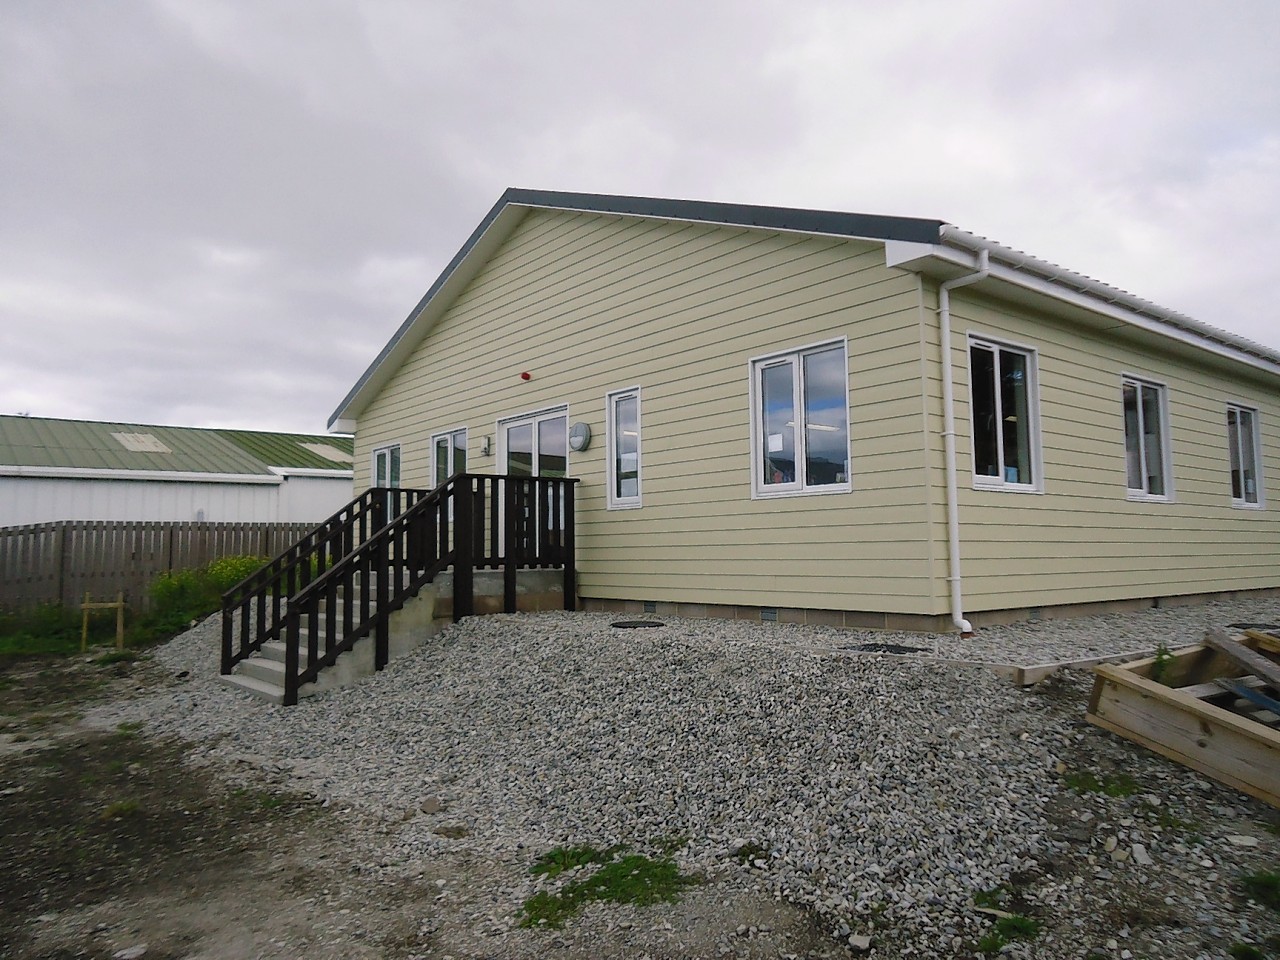 Scotframe supplied the full kit for new classroom, kitchen and boiler room at Stanley Infant School, Falklands